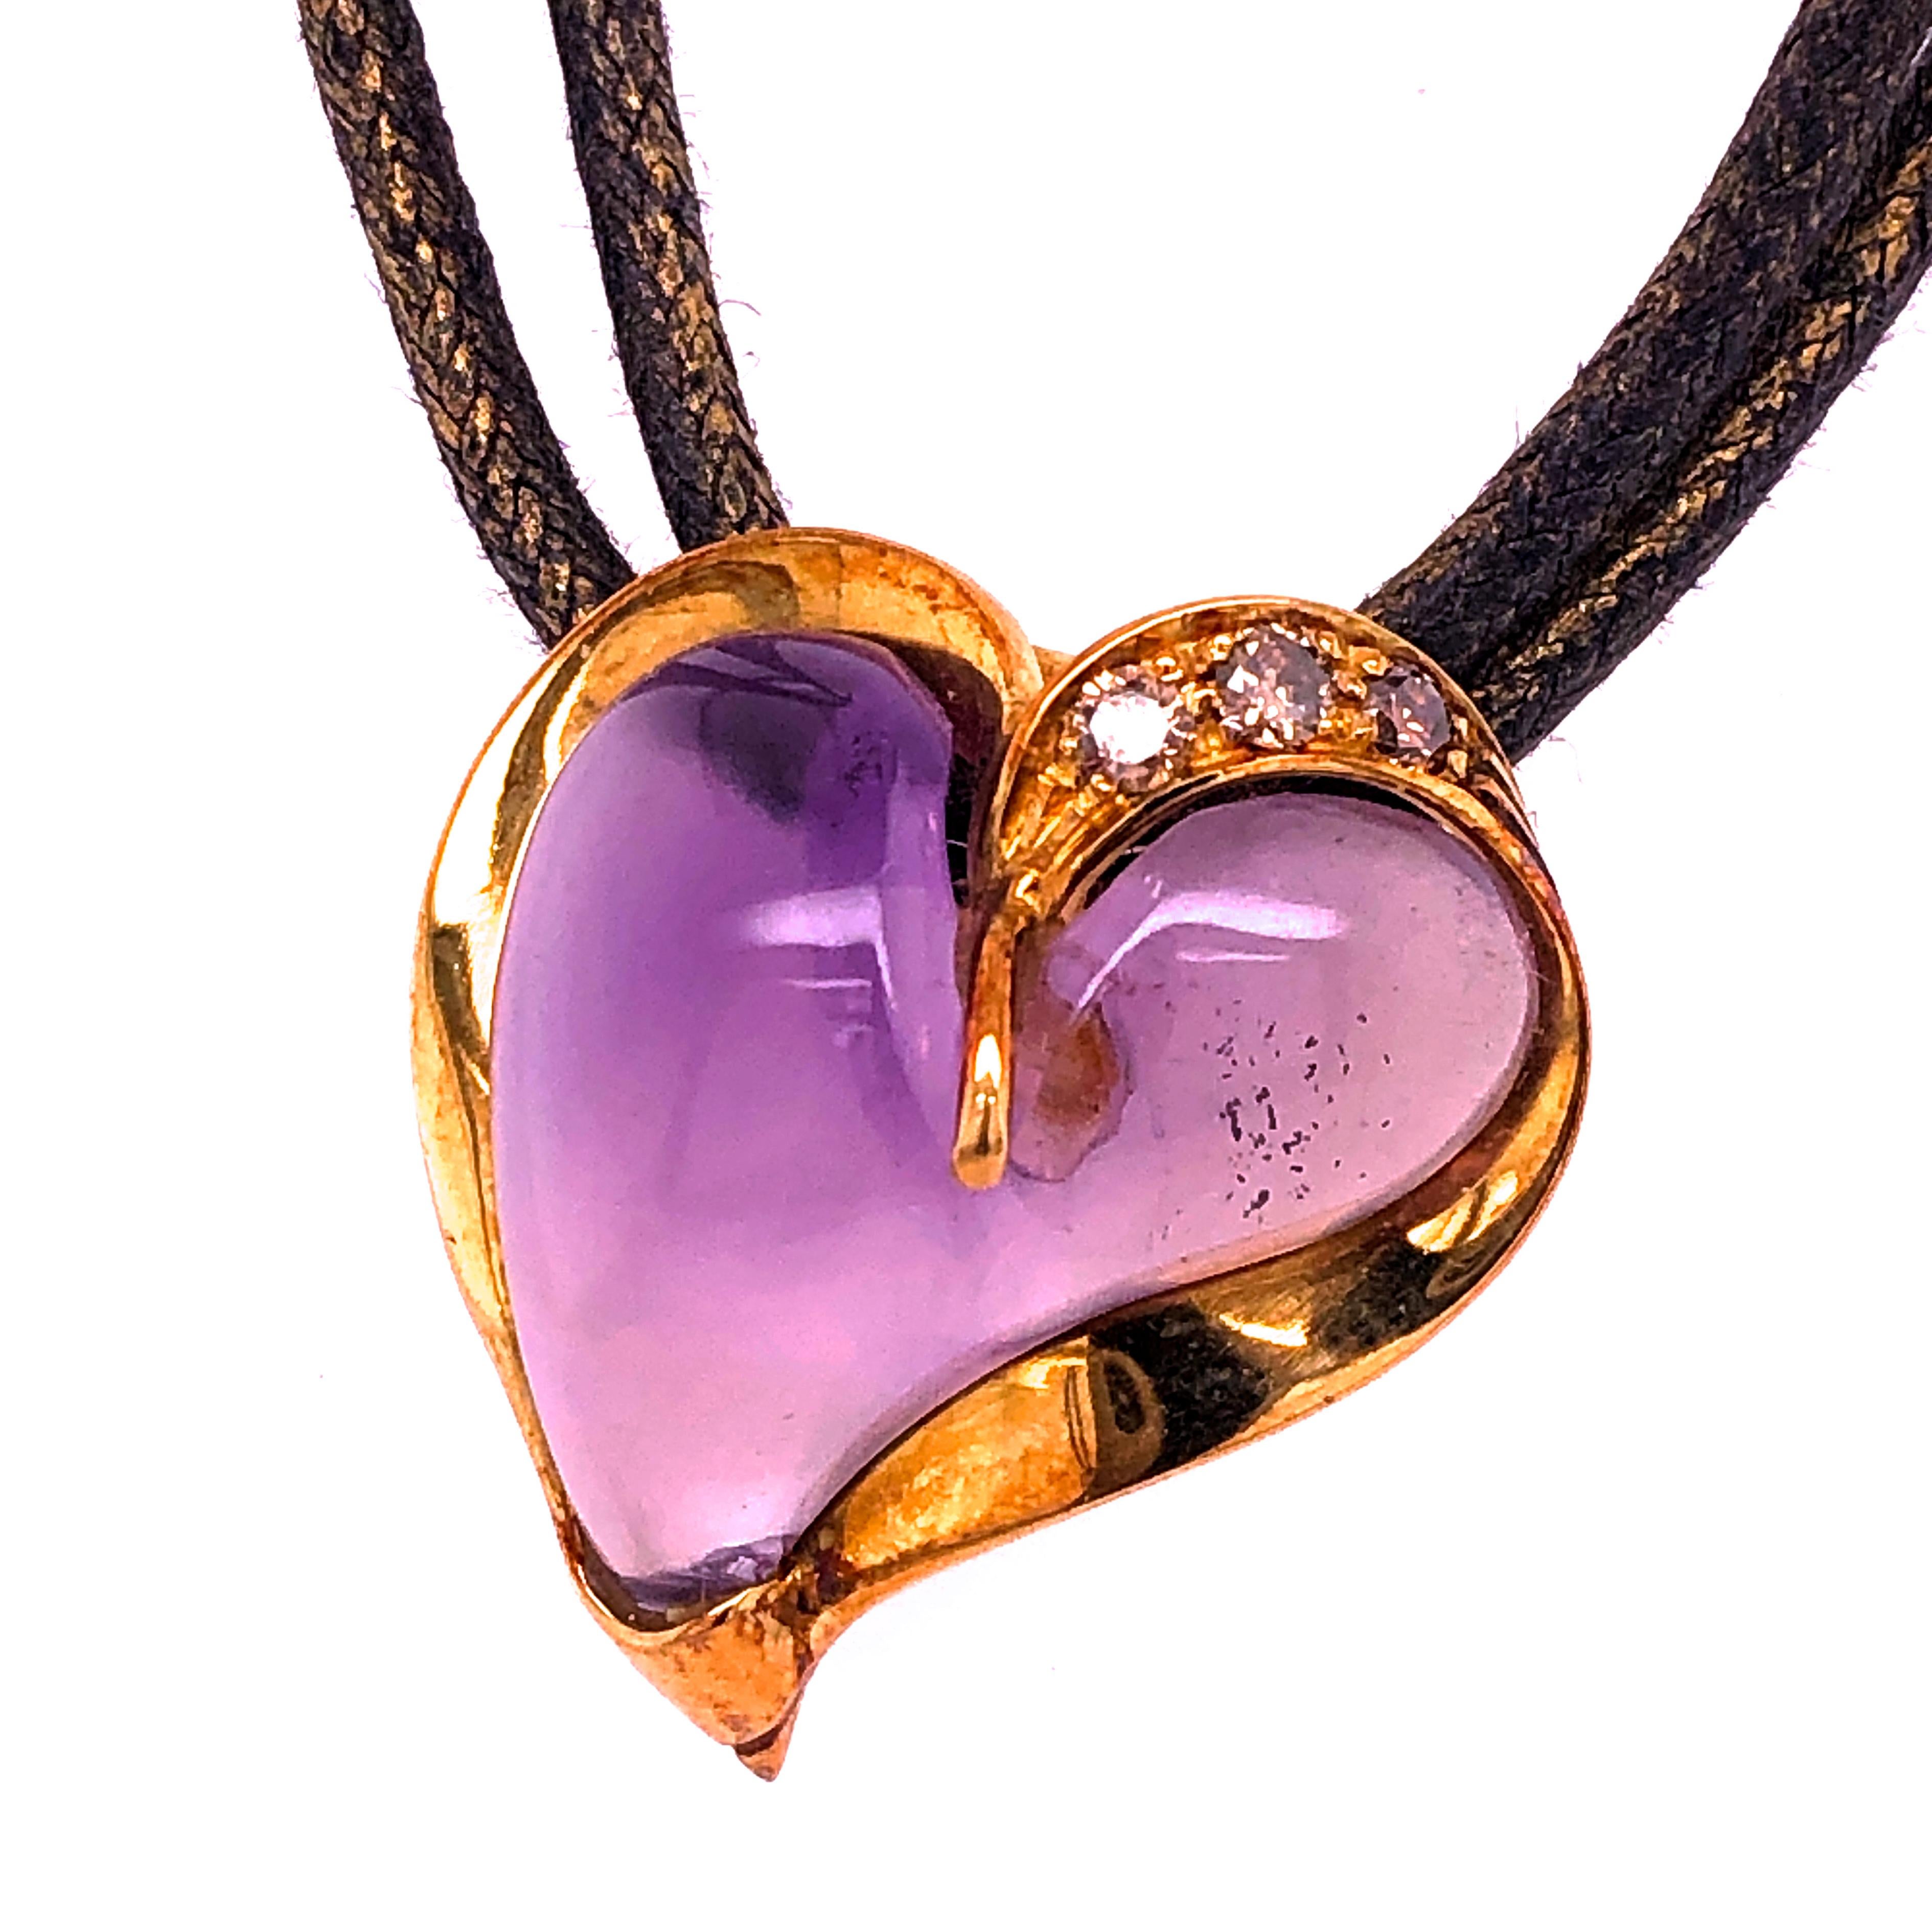 A Very Chic, Timeless, yet not traditional Heart Pendant featuring a 12Kt Natural Hand Inlaid Amethyst  Heart in a 0.24 Carat Champagne Diamond 18K Handcrafted Yellow Gold Setting. 
The 29.92 inches(76cm) 18Kt Gold Clasp Golden Brown Leather Long